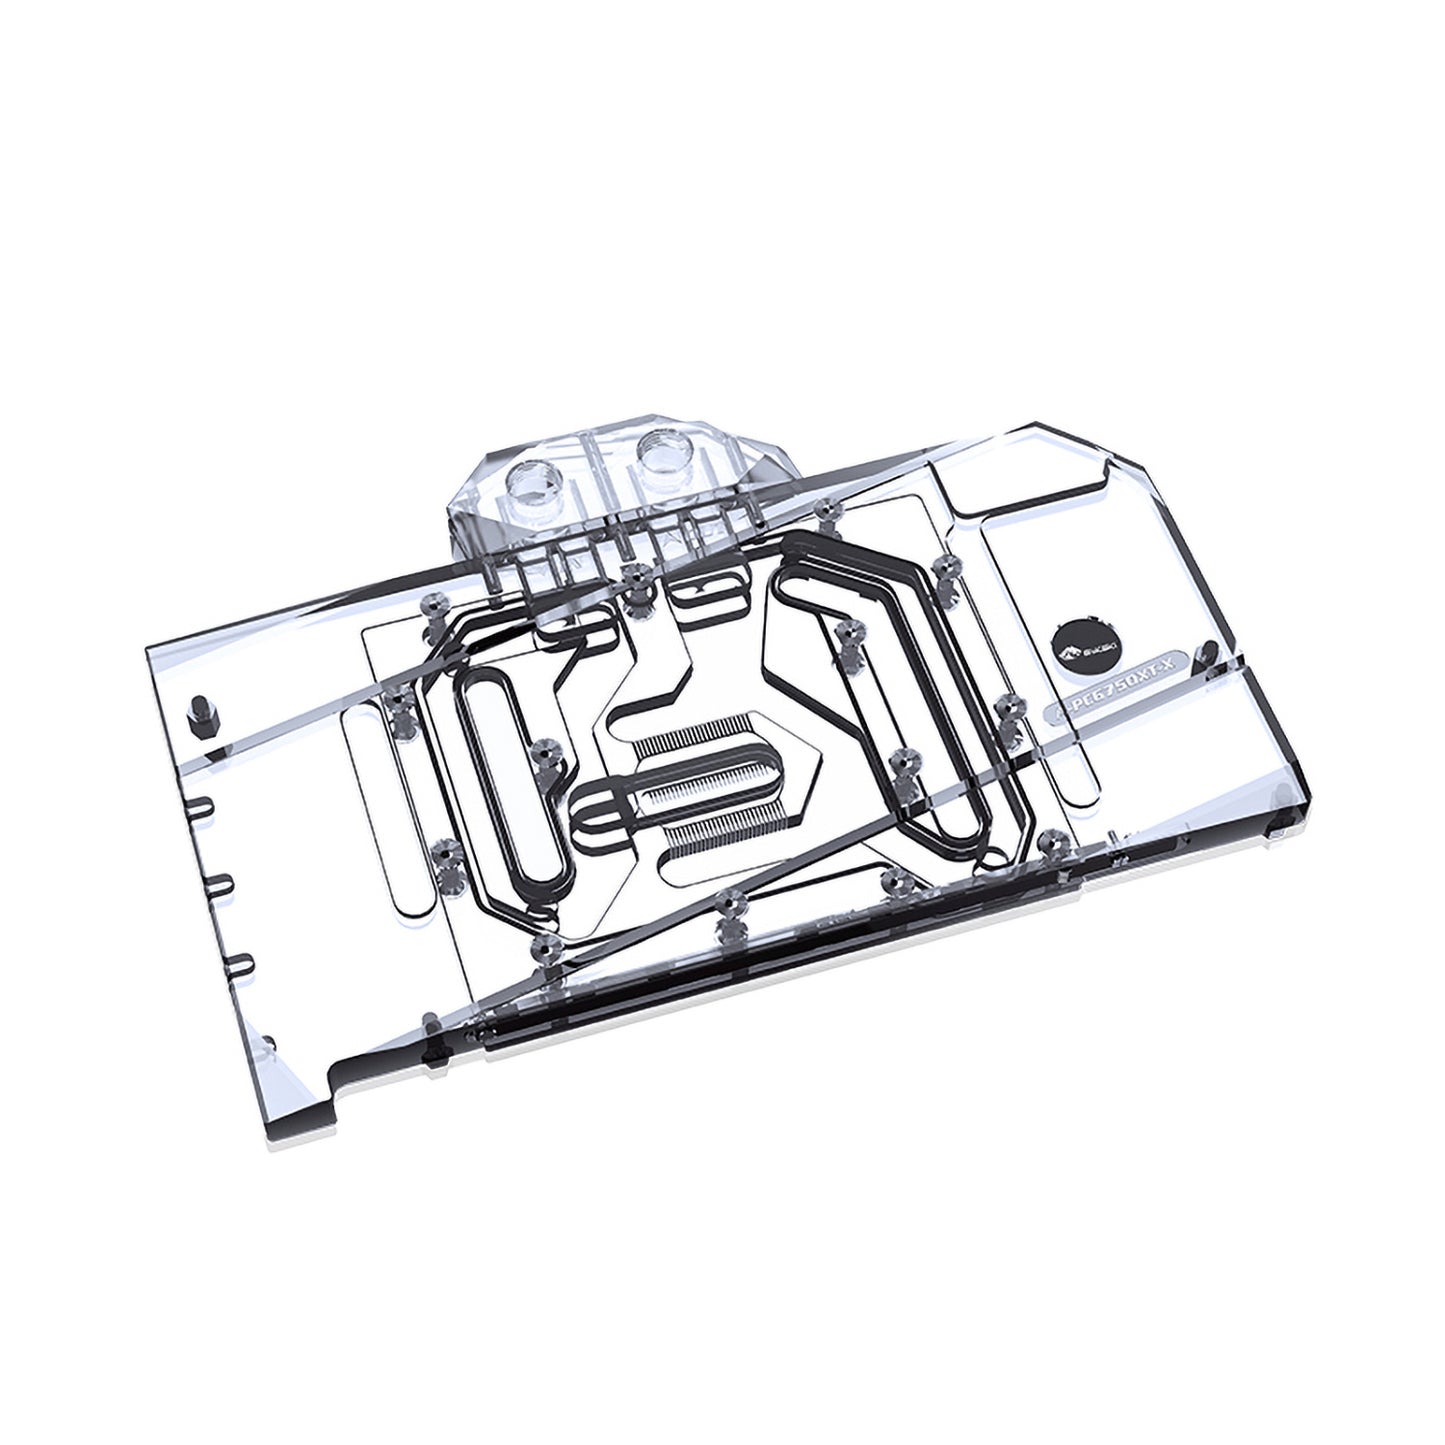 Bykski GPU Water Block For Powercolor RX 6750 XT Red Devil, Full Cover With Backplate PC Water Cooling Cooler, A-PC6750XT-X